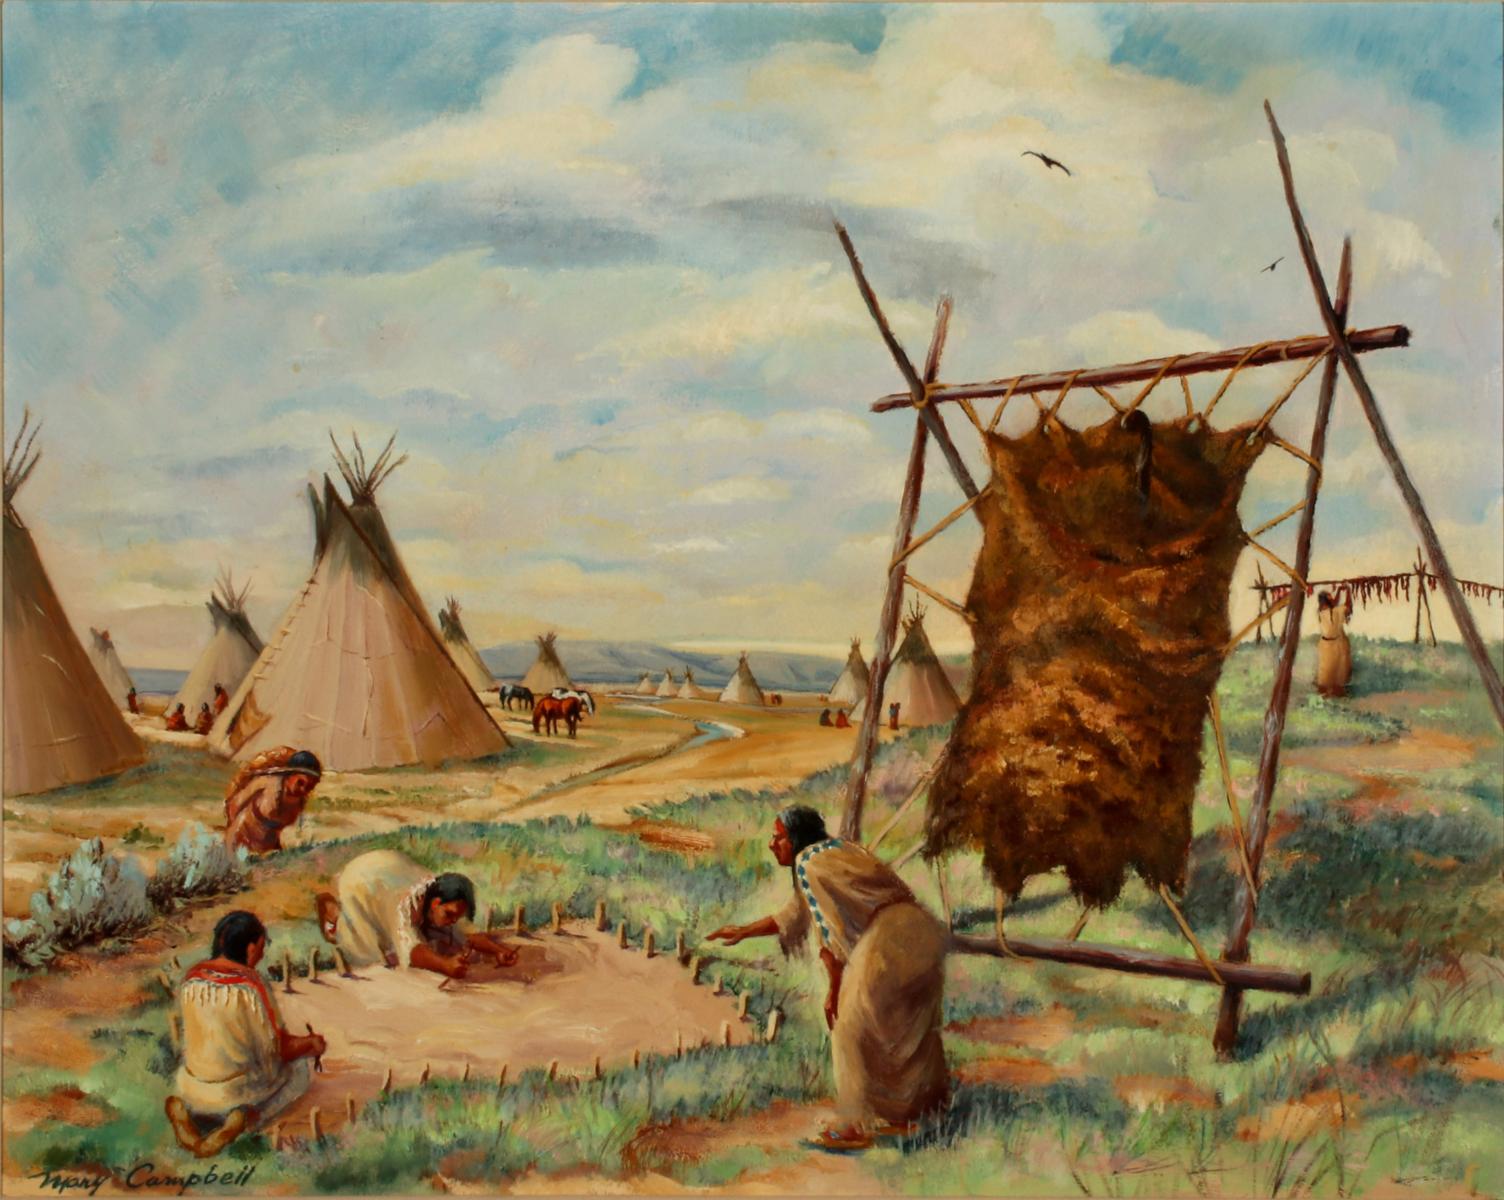 A MARY CAMPBELL O/C VIEW OF NATIVE AMERICAN GENRE